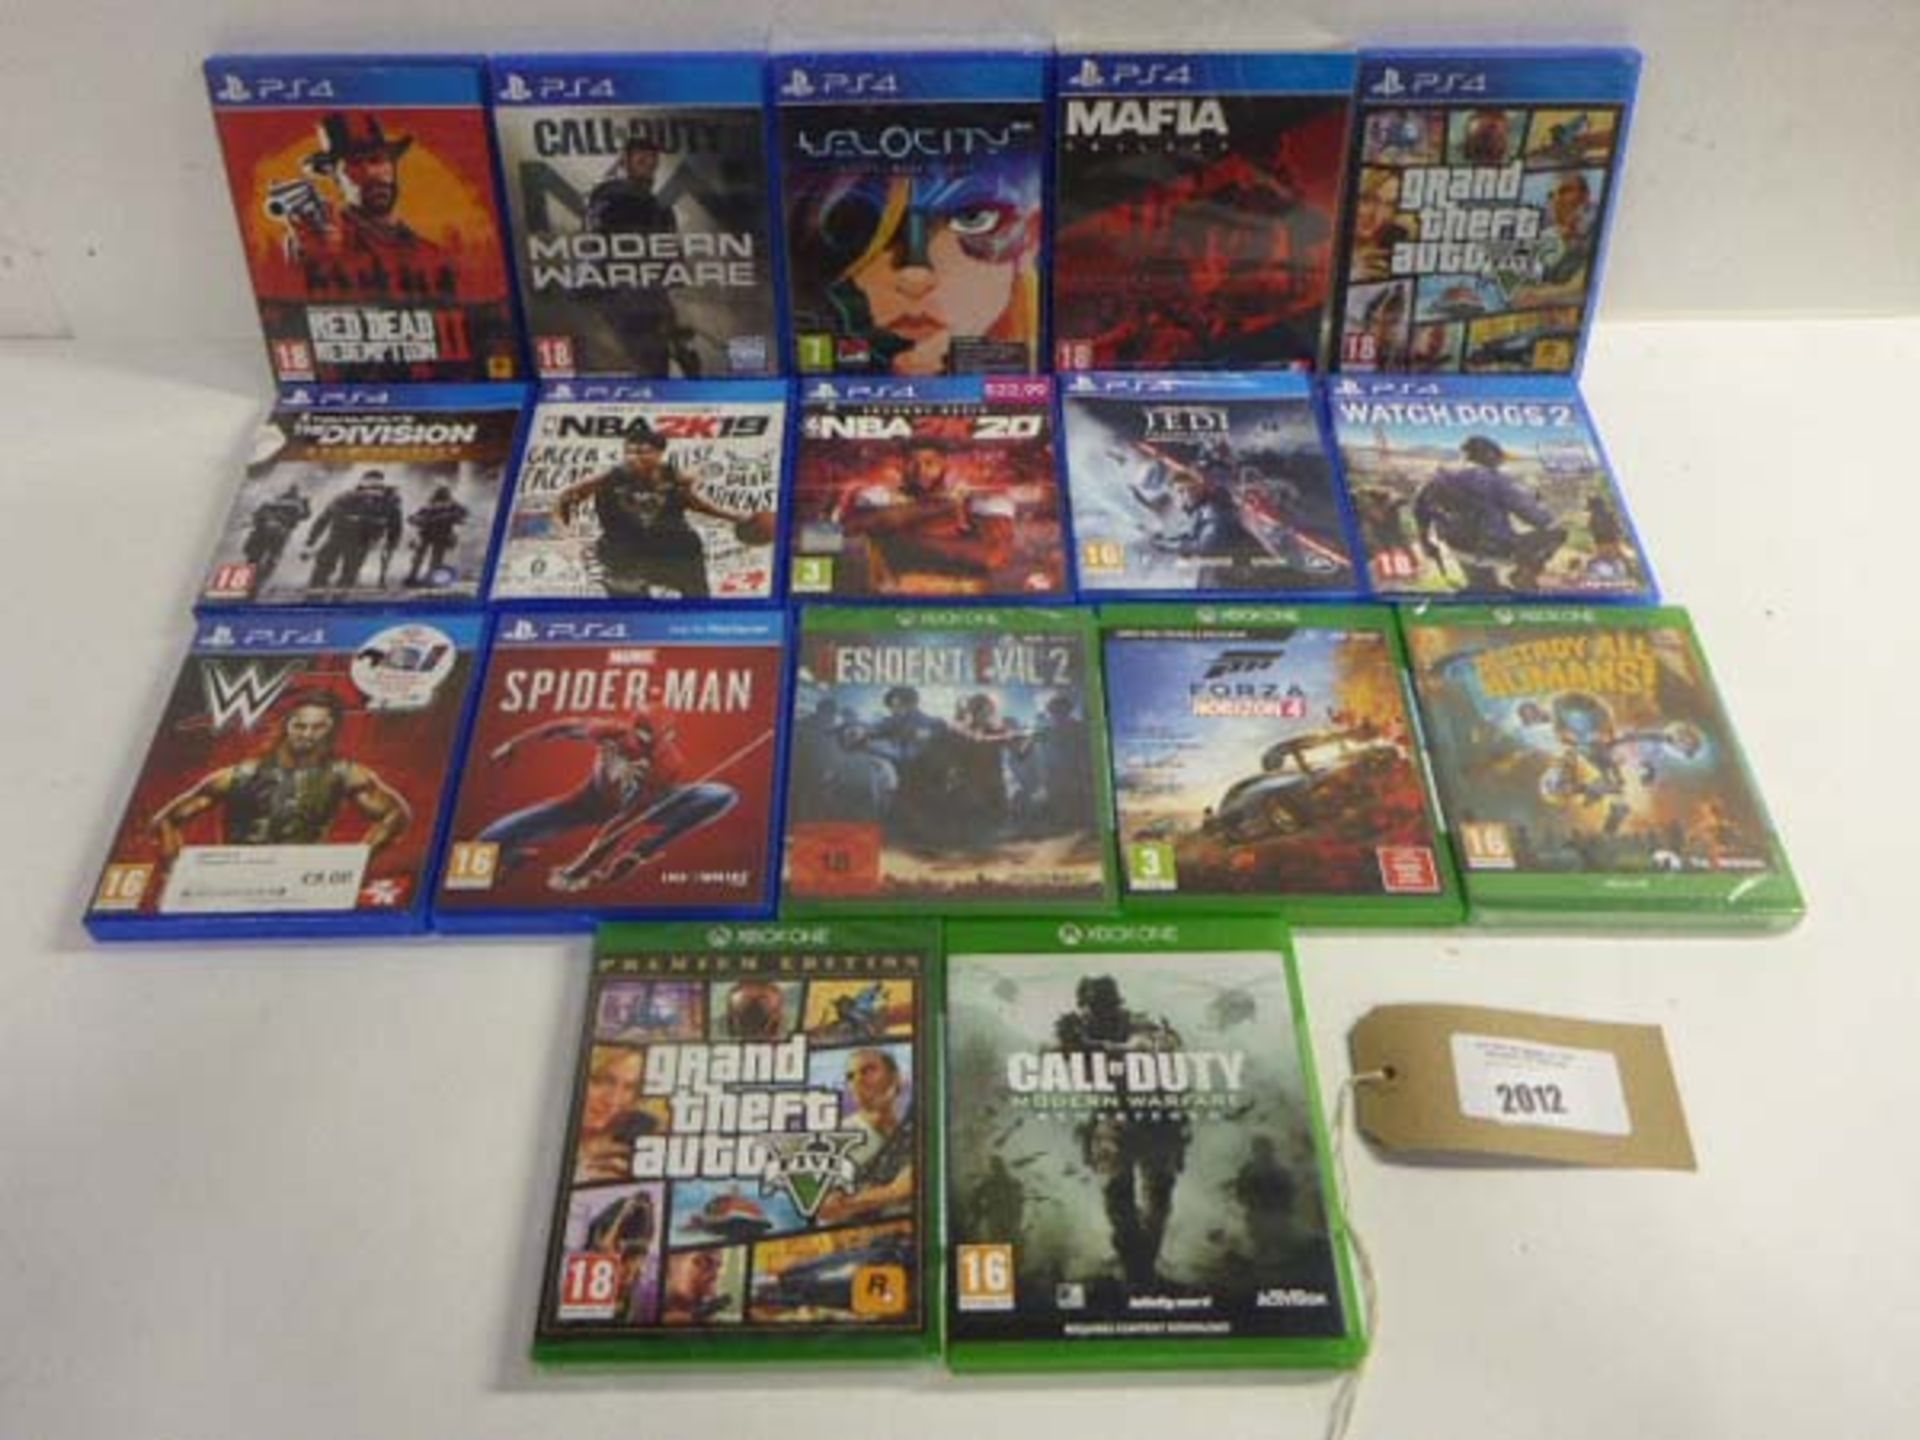 Bag containing 12 various titled PS4 games and 5 XBox One games